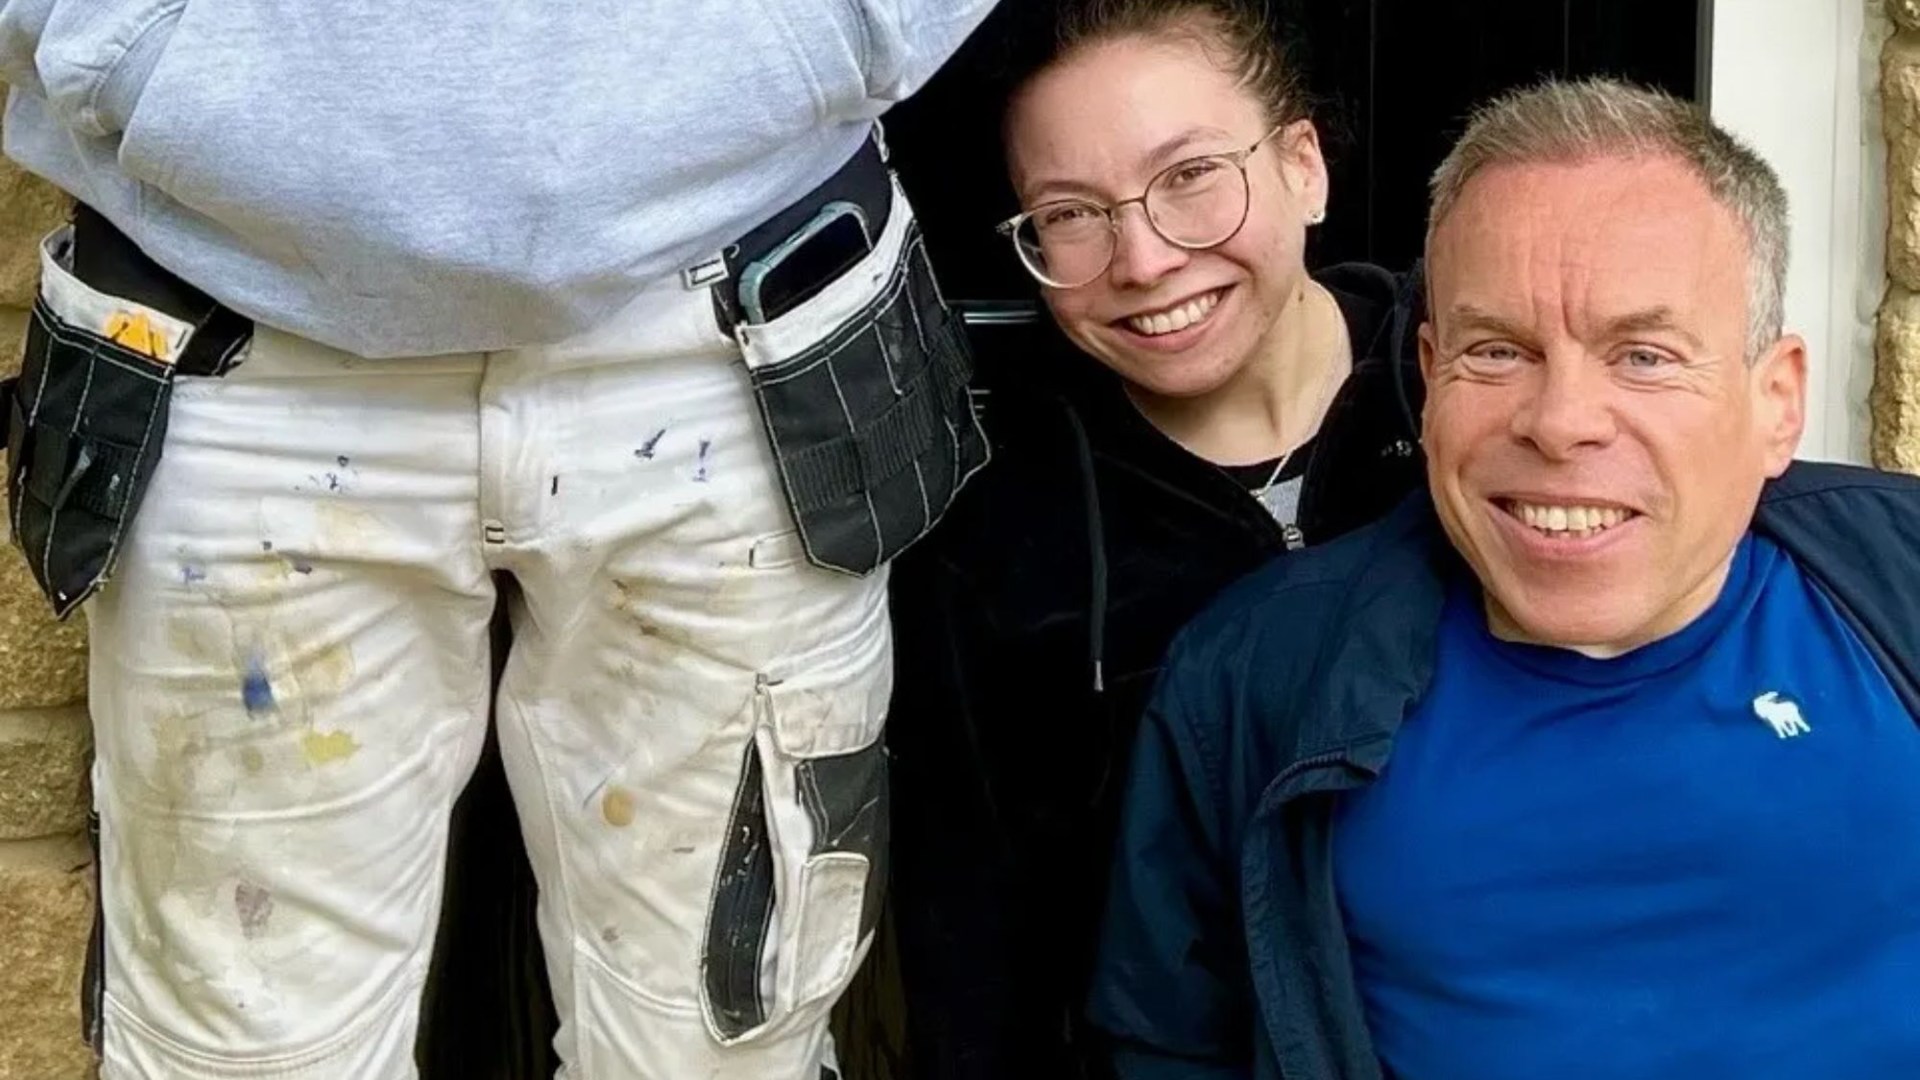 “Warwick Davis and Daughter Shine in New Project After Heartbreaking Loss” – A family story, Warwick Davis, Hollyoaks actress, new project, beloved wife.